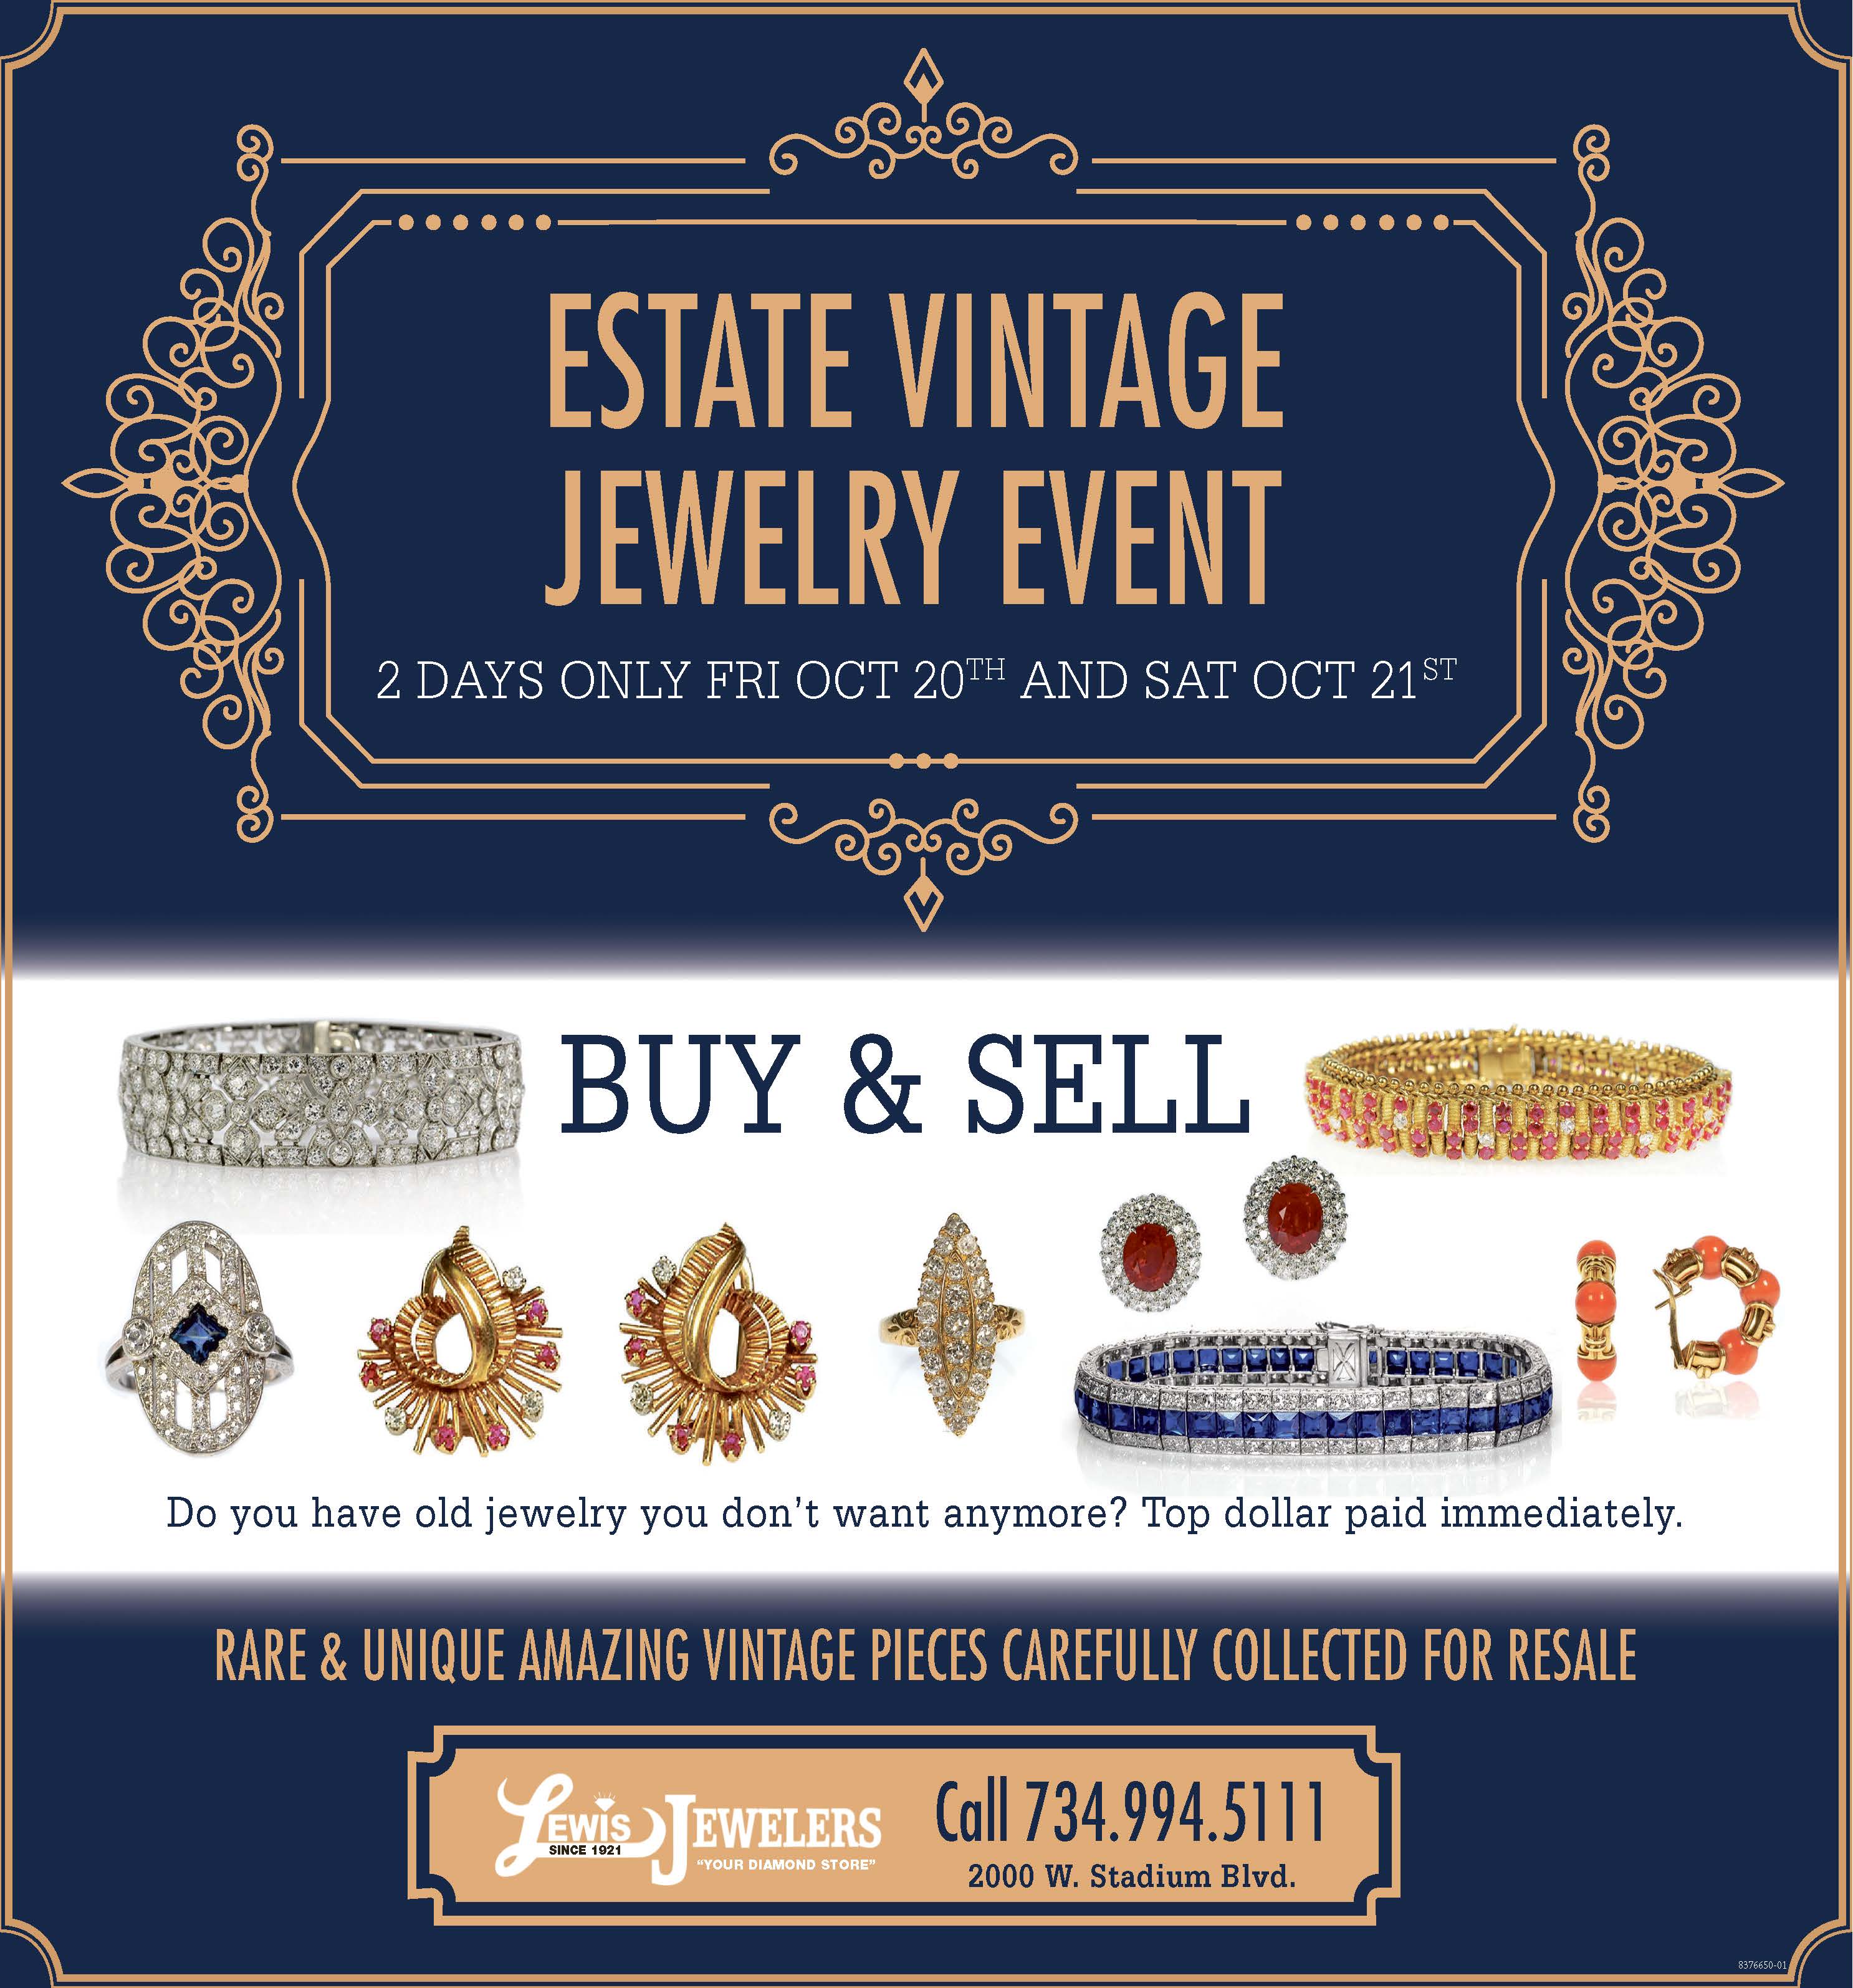 ?Ann Arbor Fine Jewelry Retailer Lewis Jewelers Announces Vintage and Estate Jewelry Sales Event